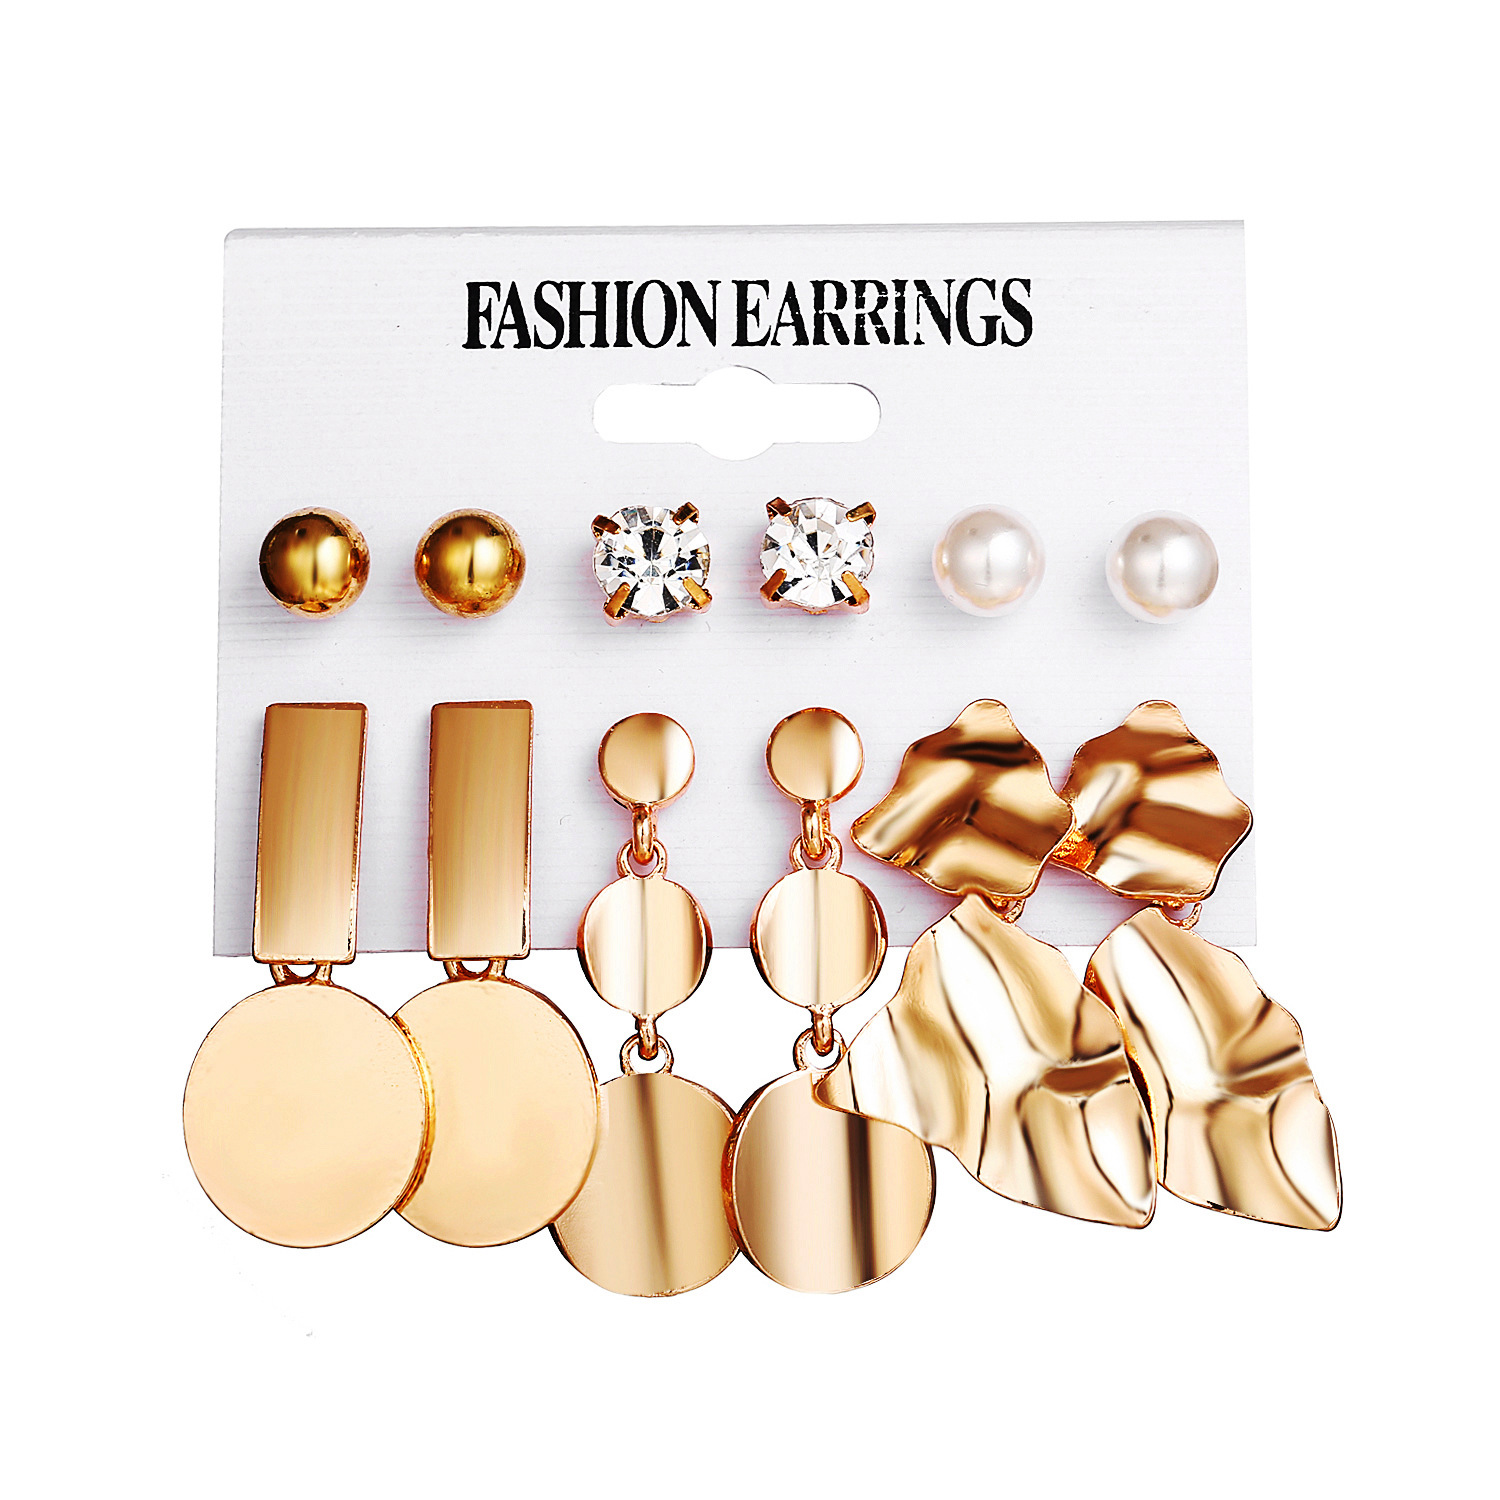 6 pairs of irregular geometric gold stud earrings with metal elements